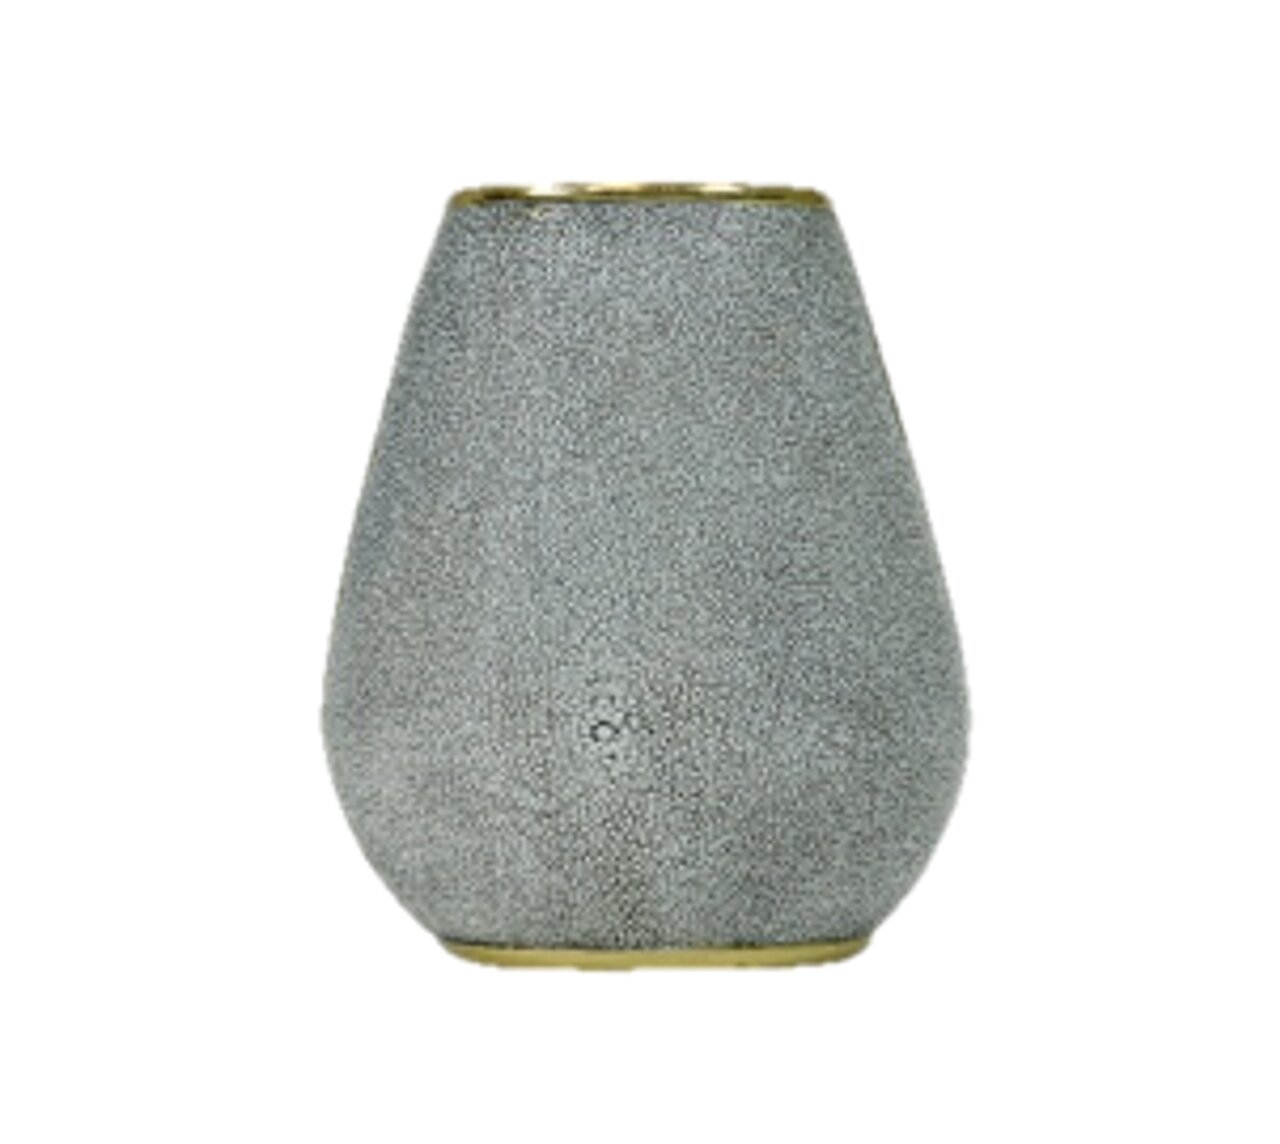 Mindy Brownes Amara Shimmering White Faux Shagreen Small Vase Set Of 2